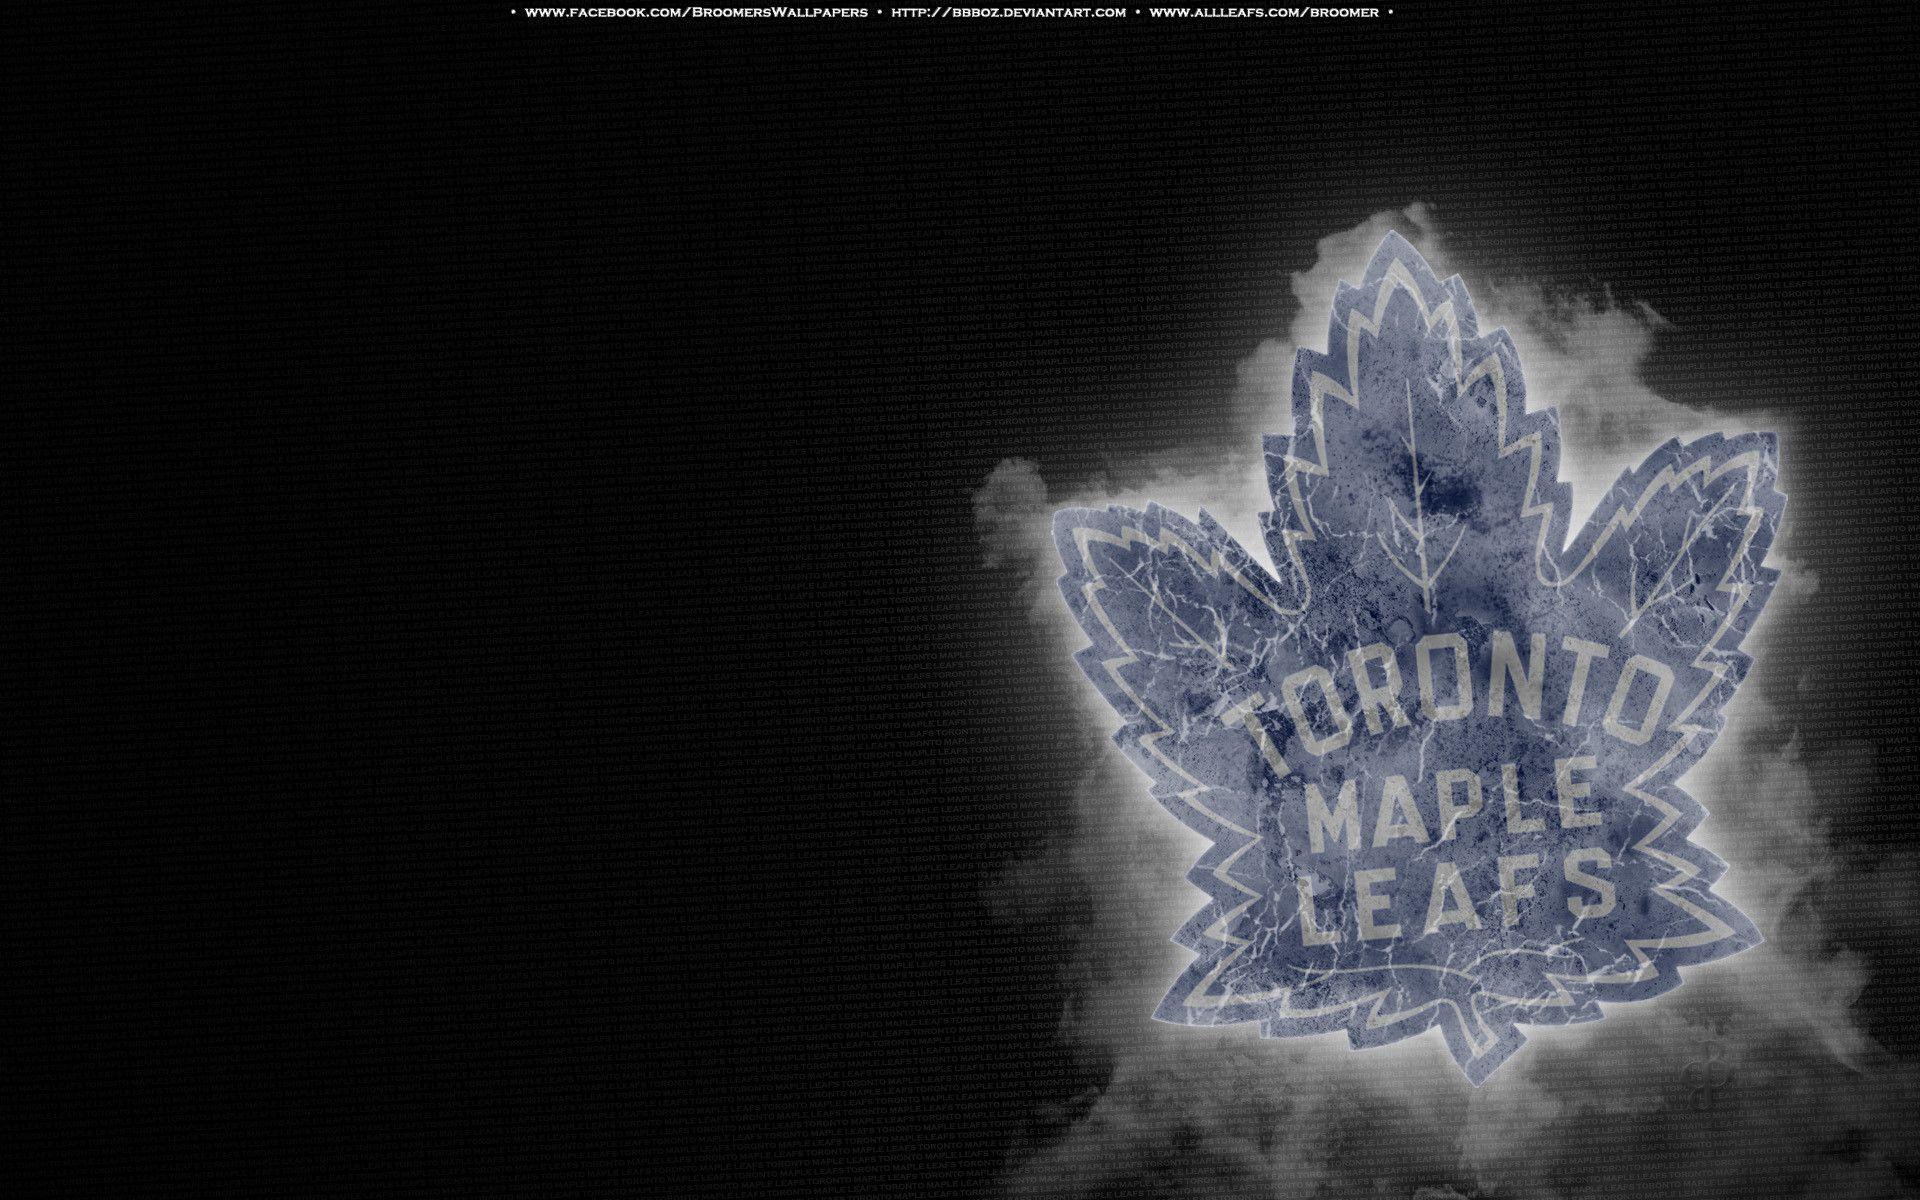 Toronto Maple Leafs Backgrounds - Wallpaper Cave